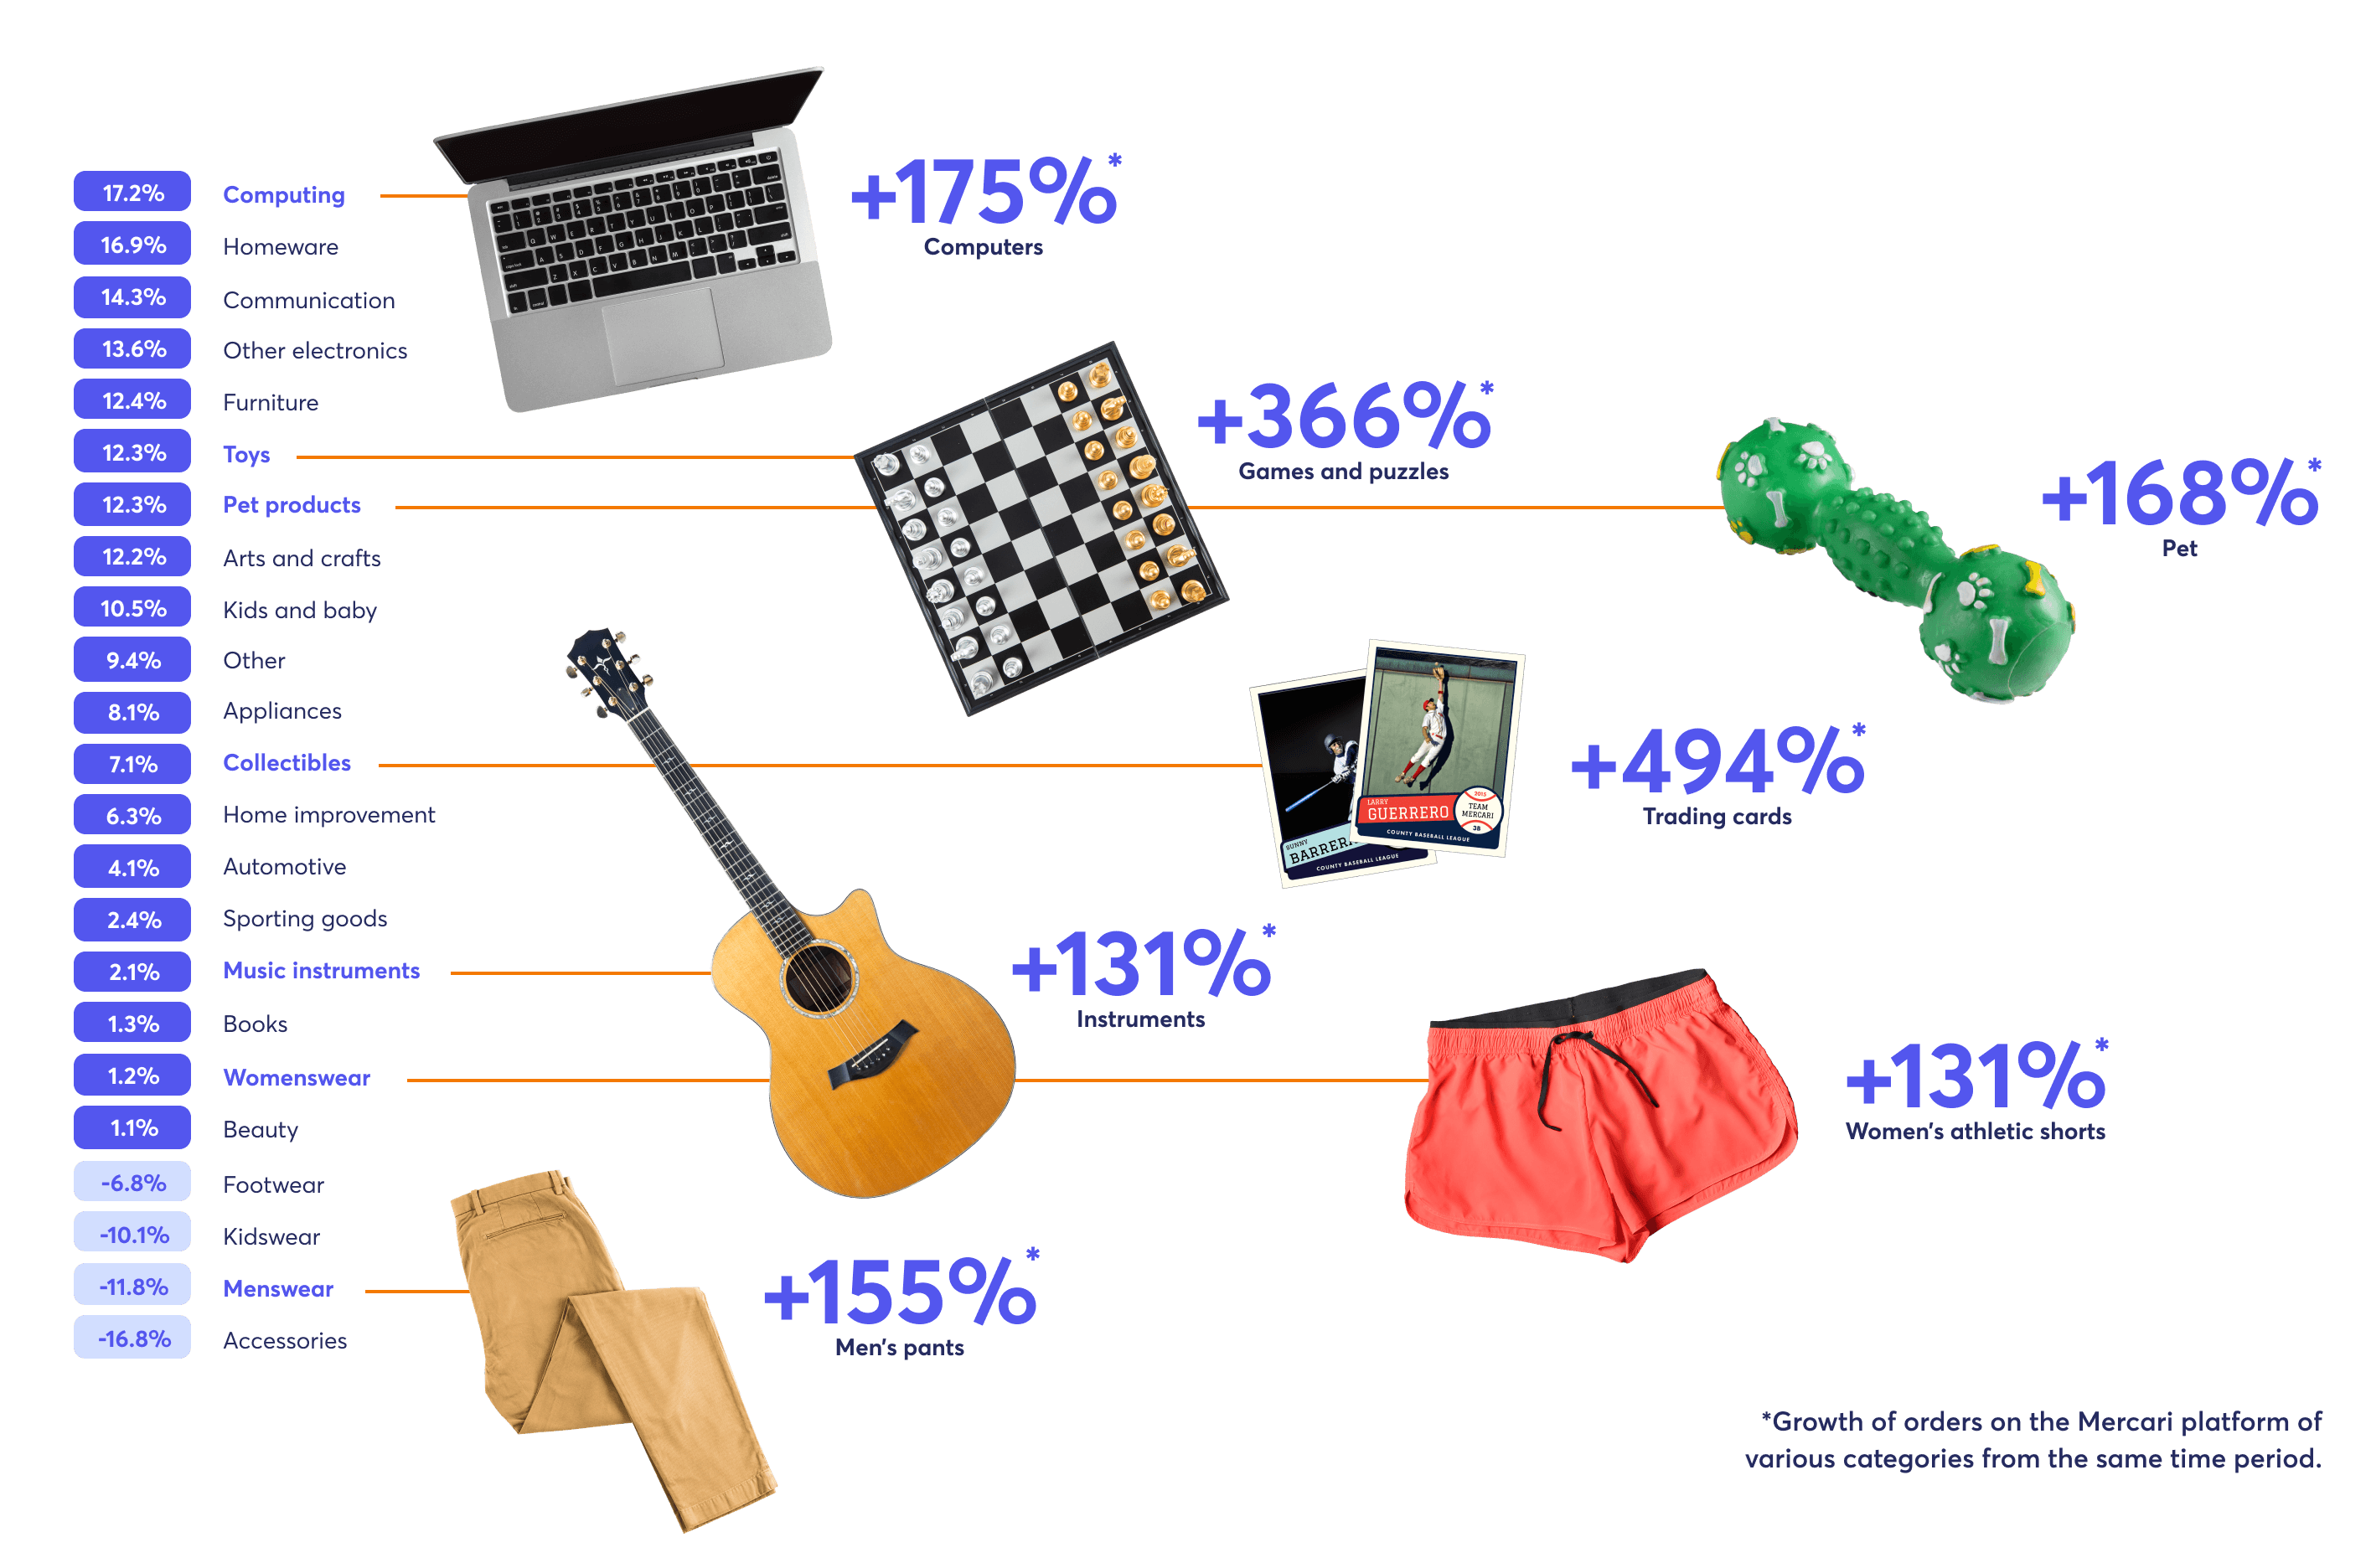 Resale categories growth